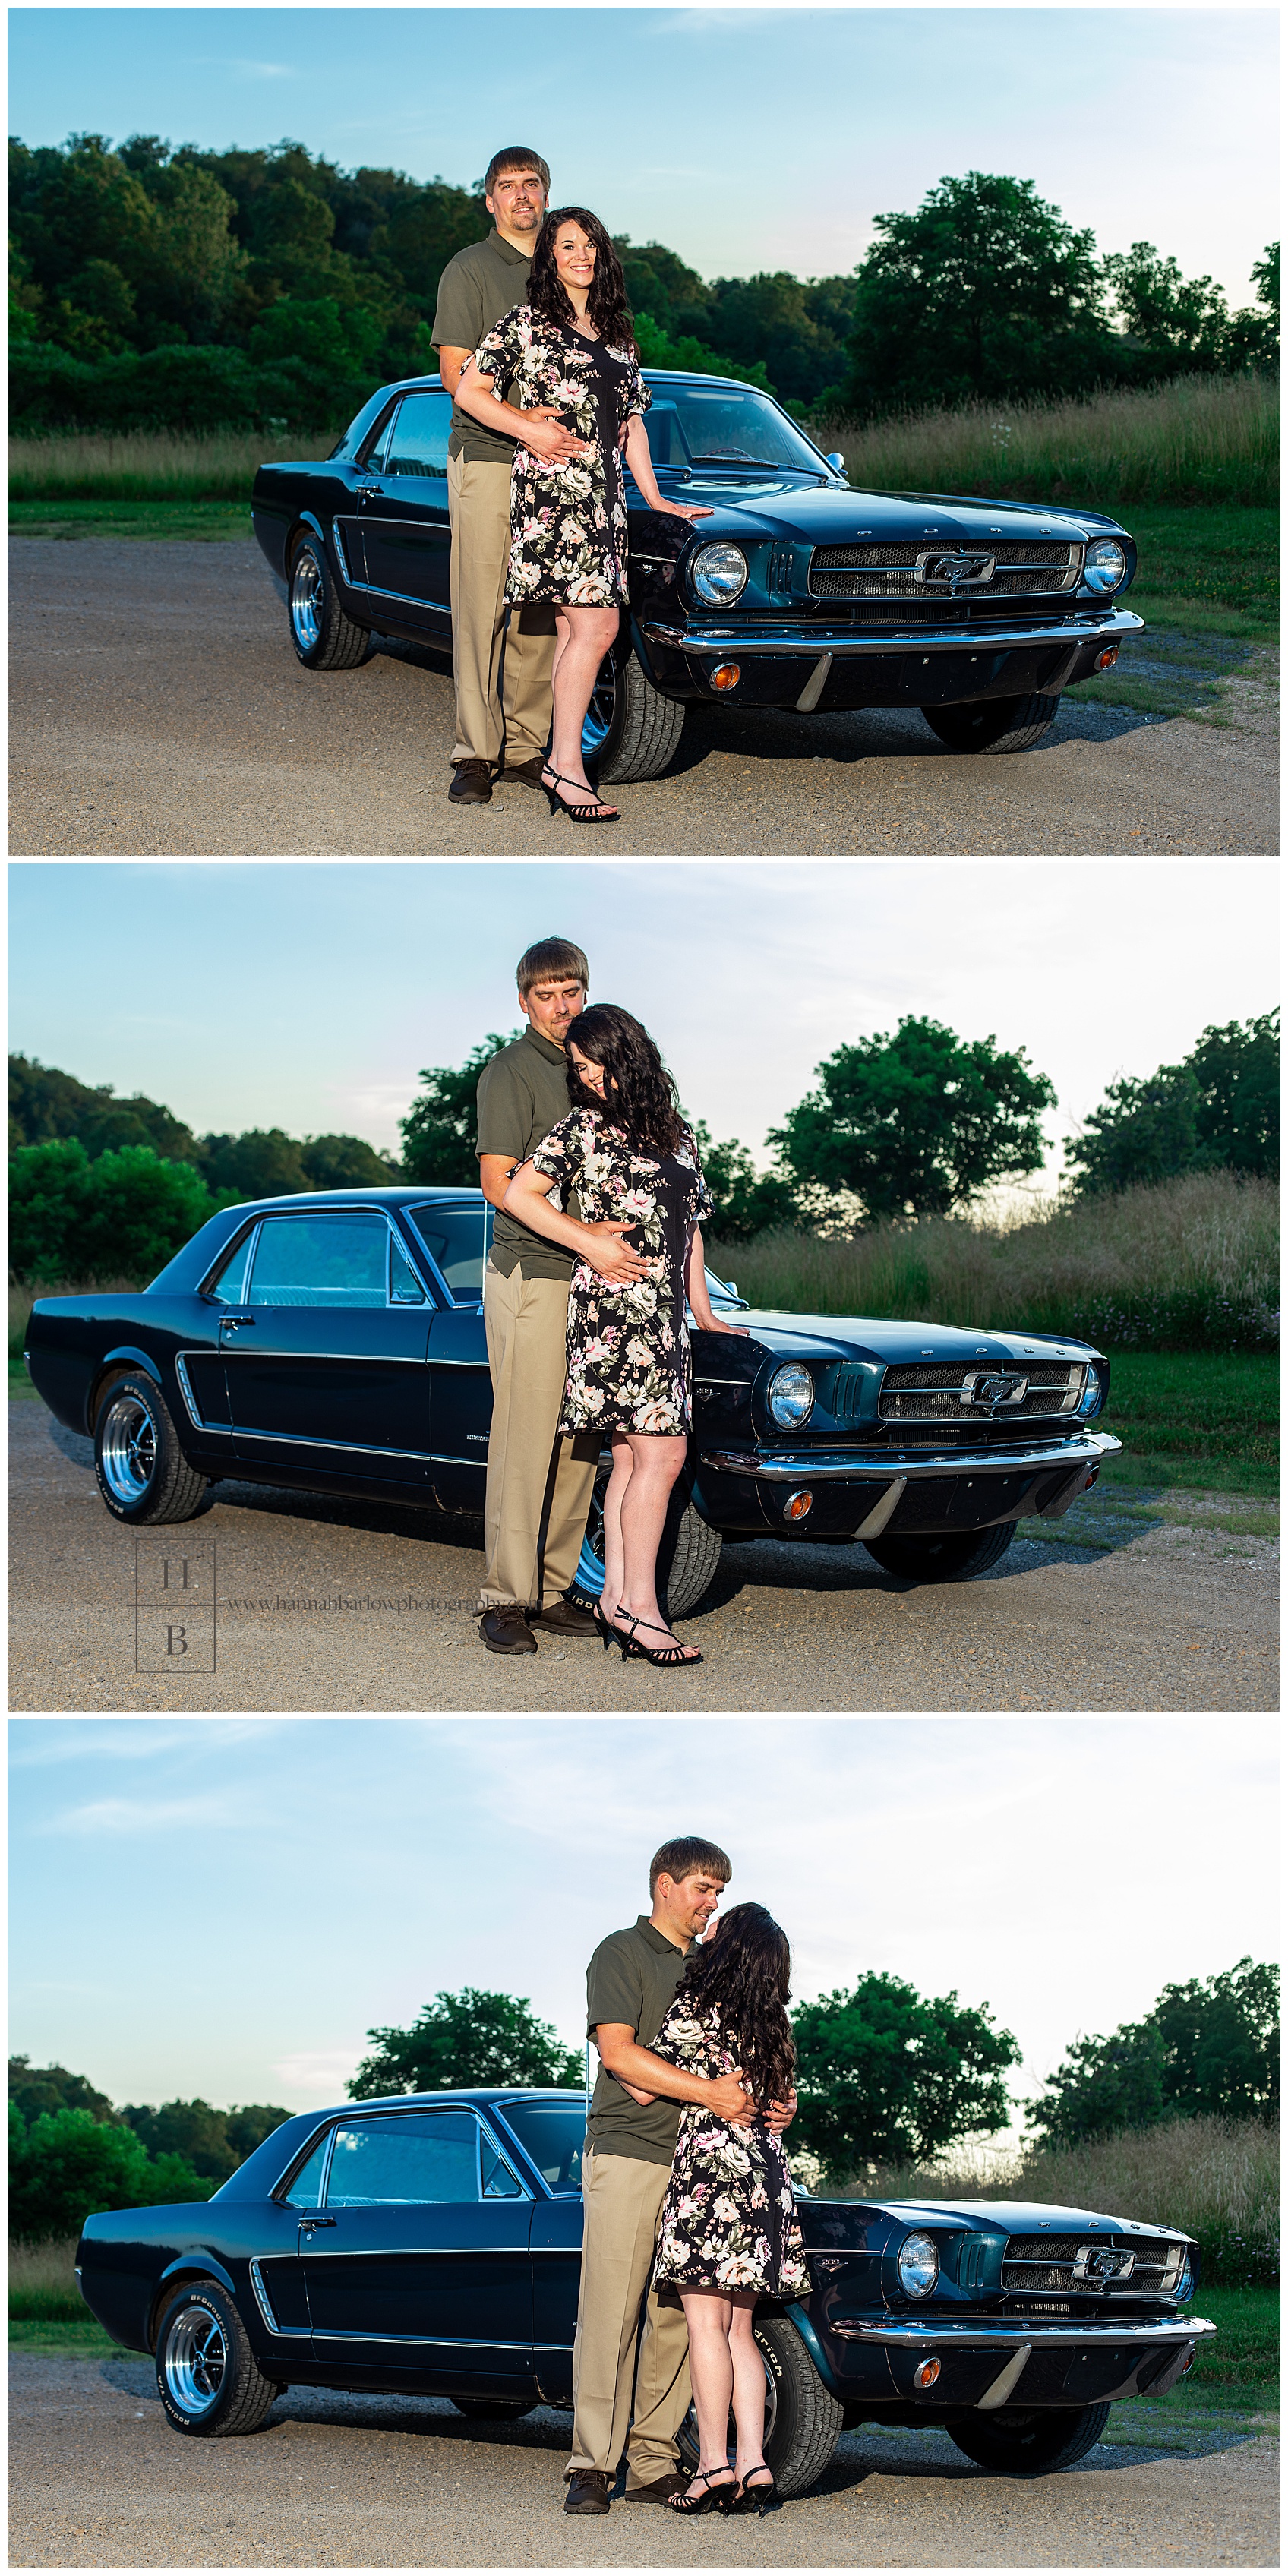 Vintage Mustang Engagement Photos at Sunset